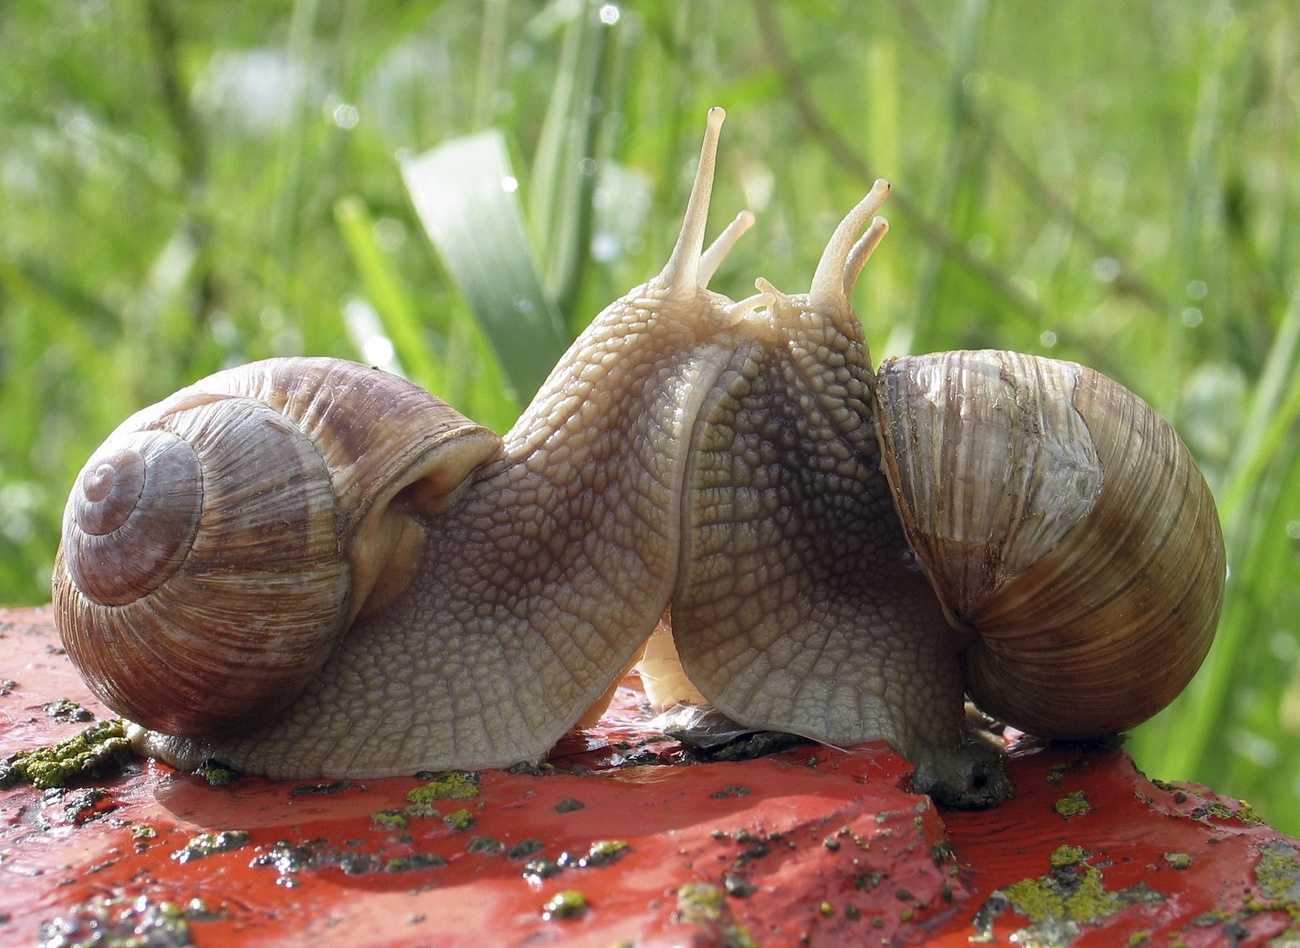 Two snails touch heads. They are on a red surface and blades of green grass are visible in the background.